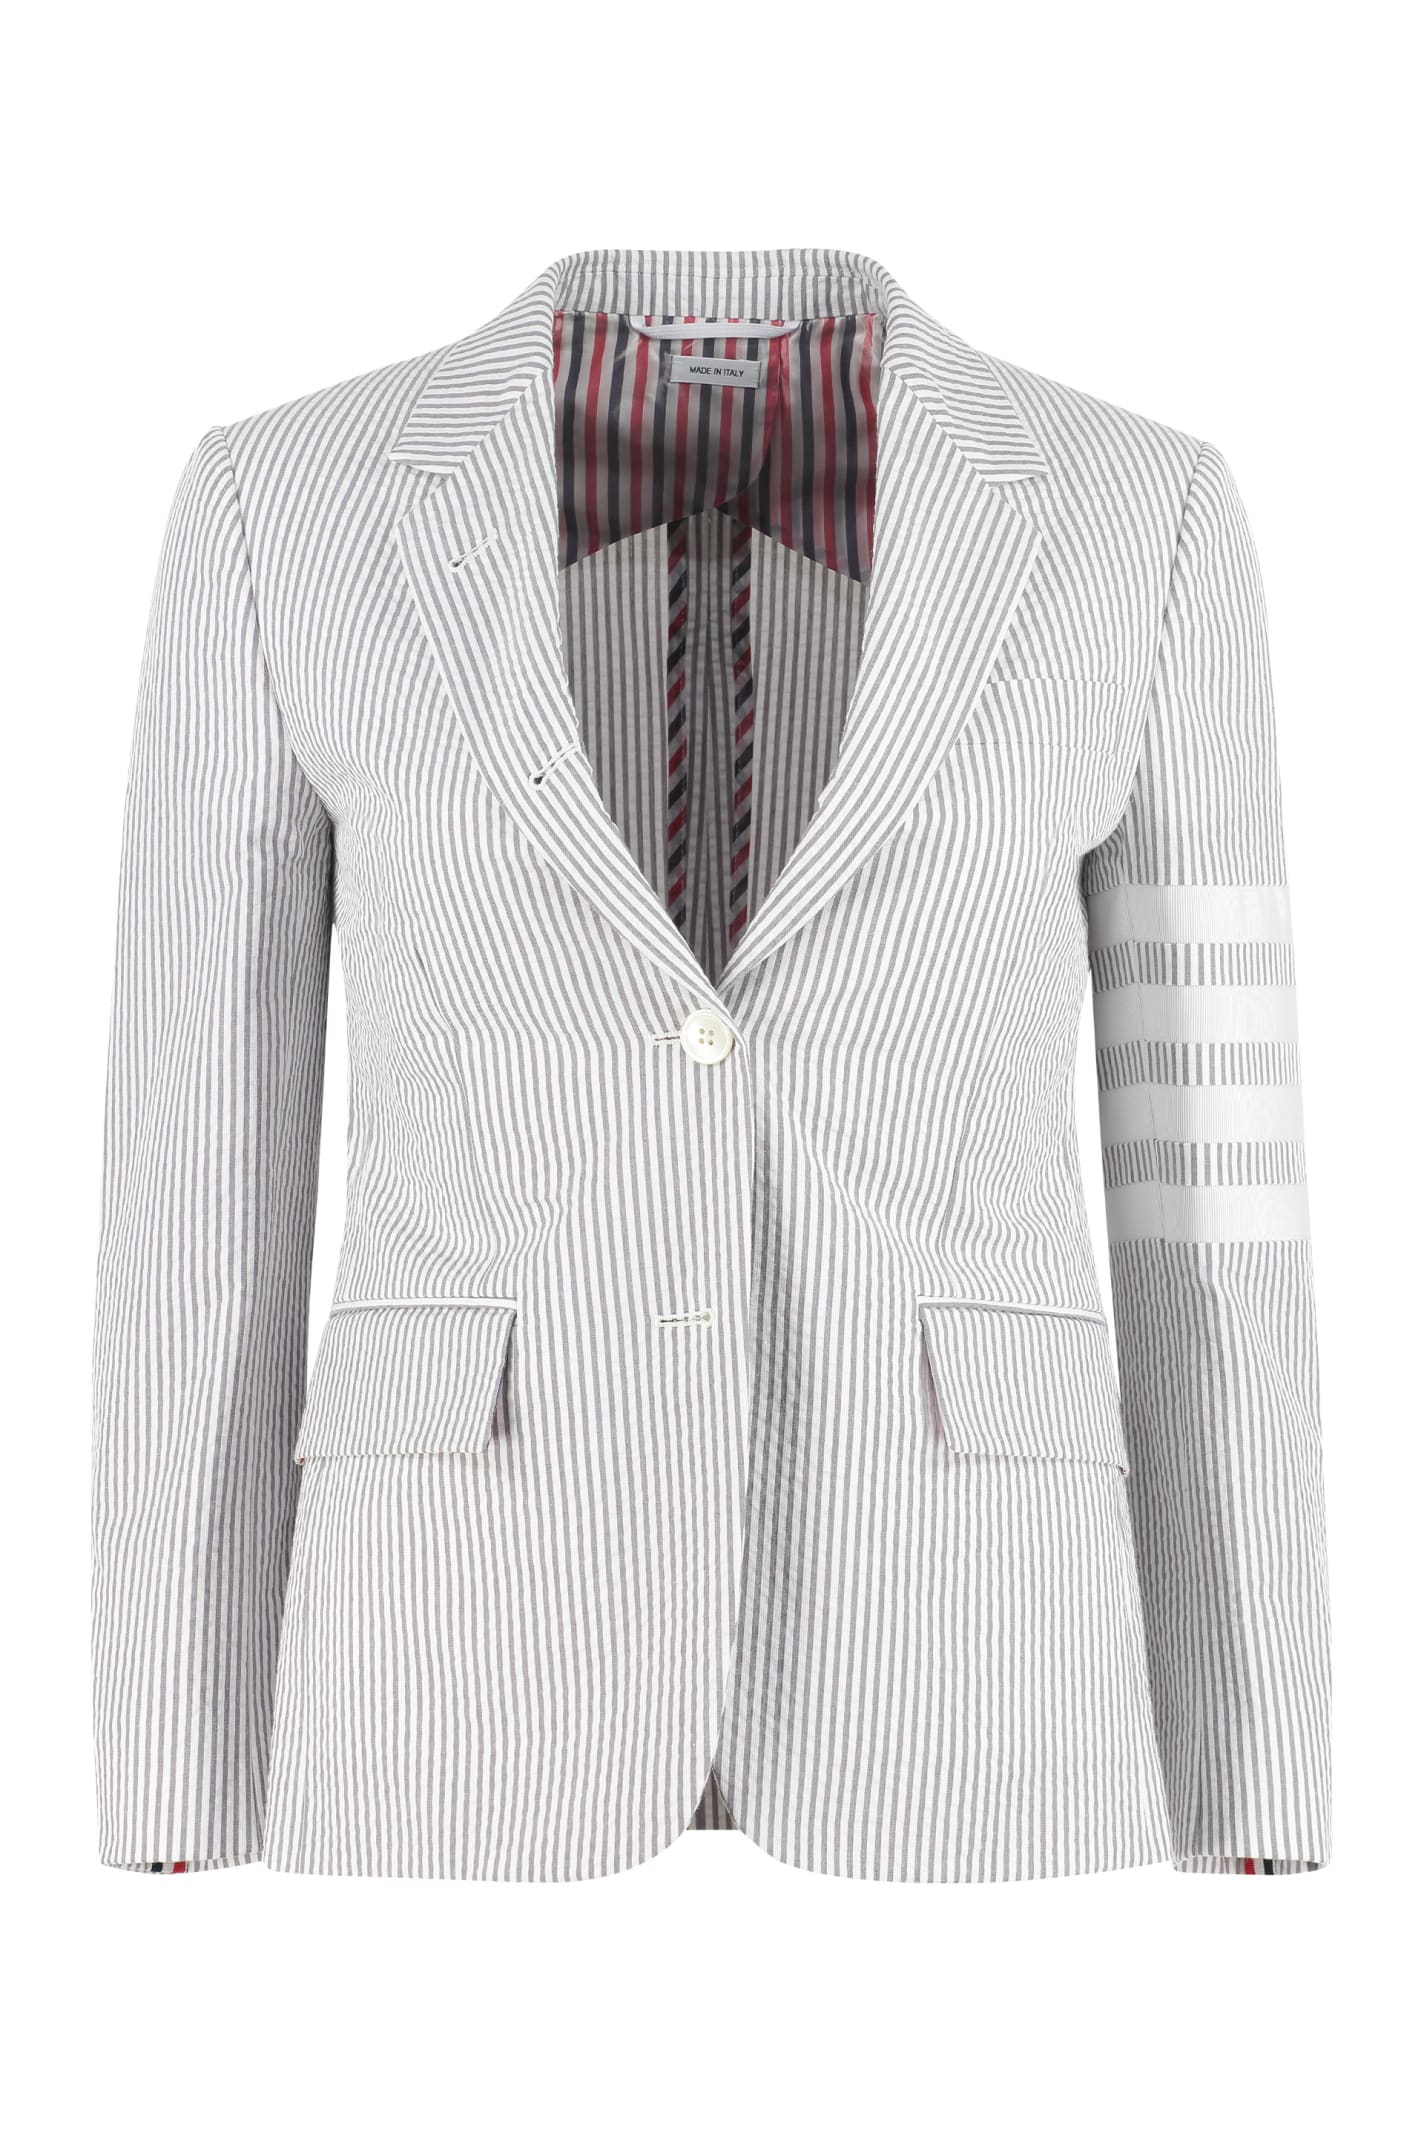 Thom Browne Single-breasted Two-button Blazer